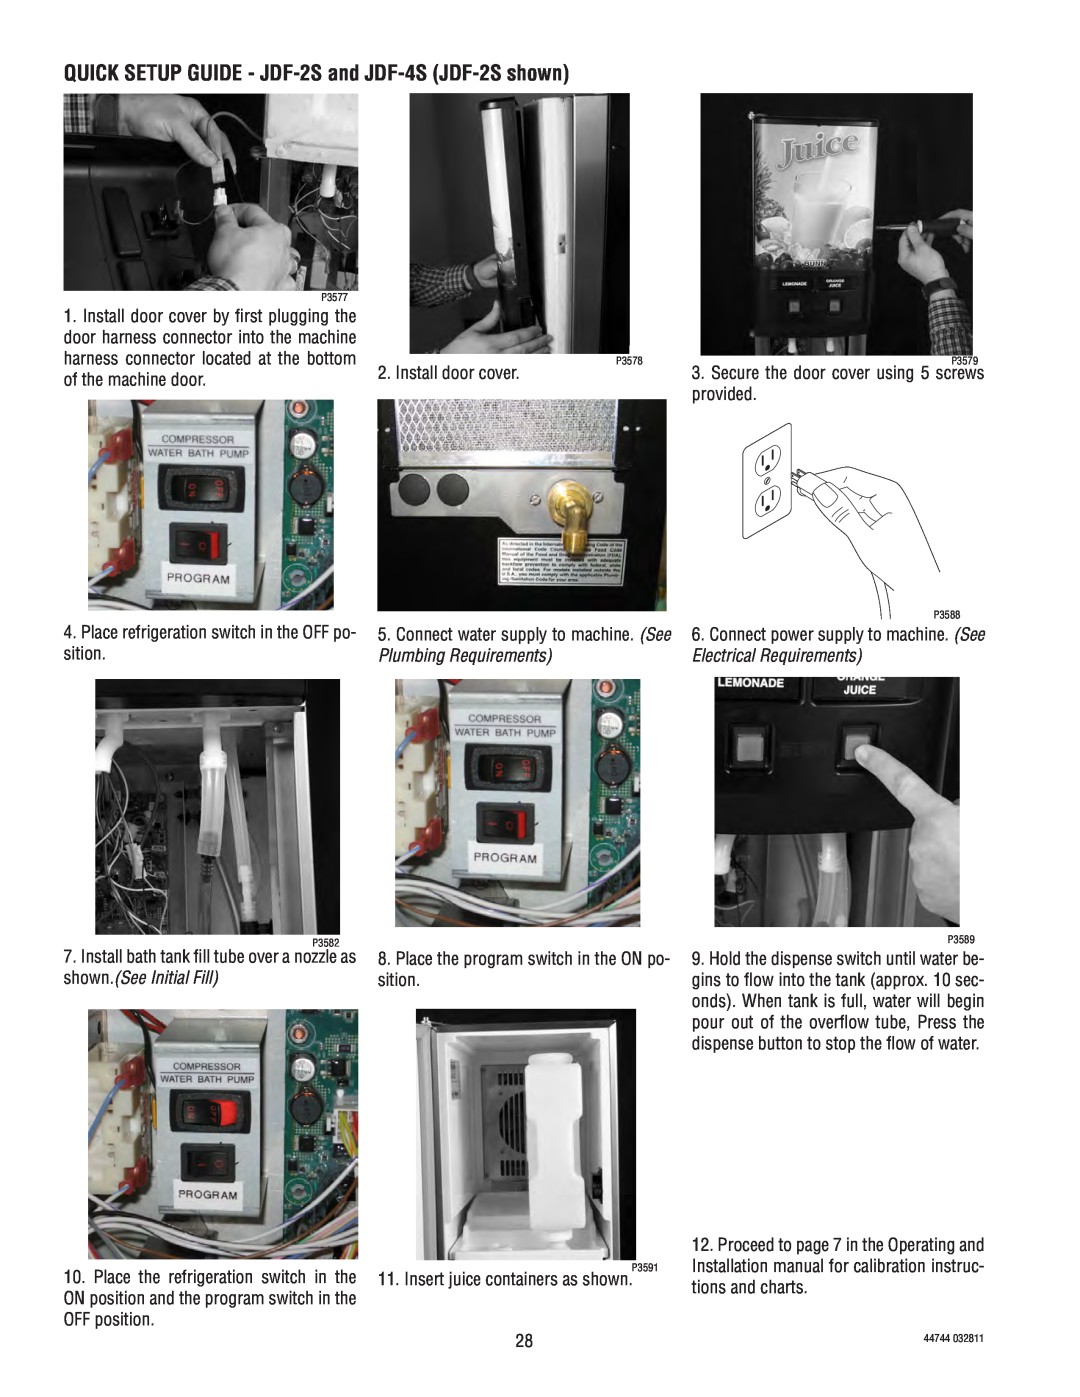 Bunn service manual QUICK SETUP GUIDE - JDF-2S and JDF-4S JDF-2S shown, Plumbing Requirements, shown.See Initial Fill 